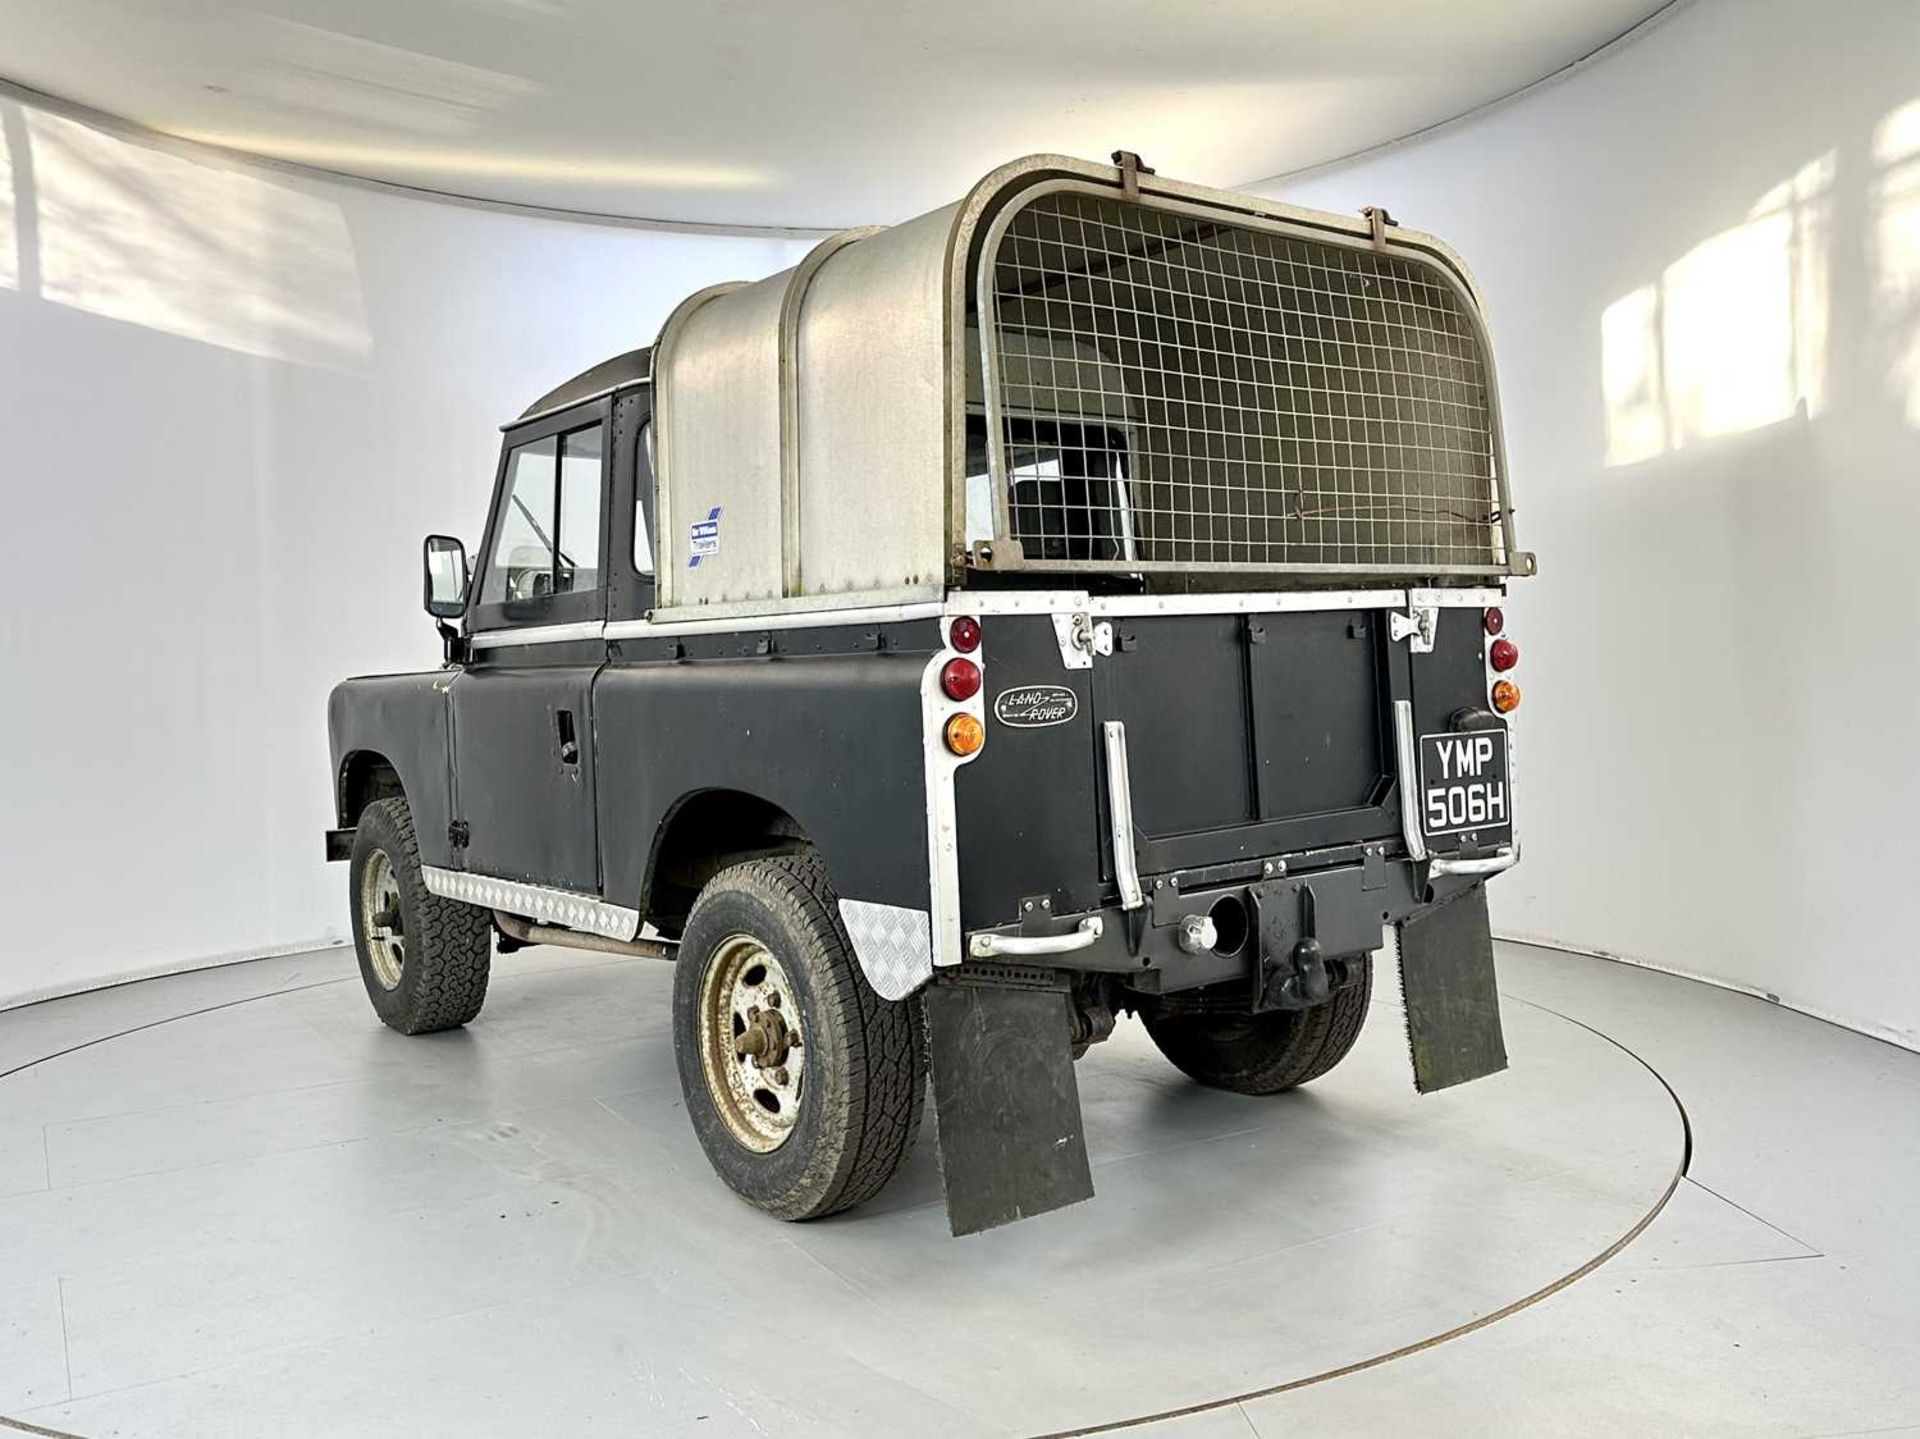 1969 Land Rover Series 2A - Image 7 of 27